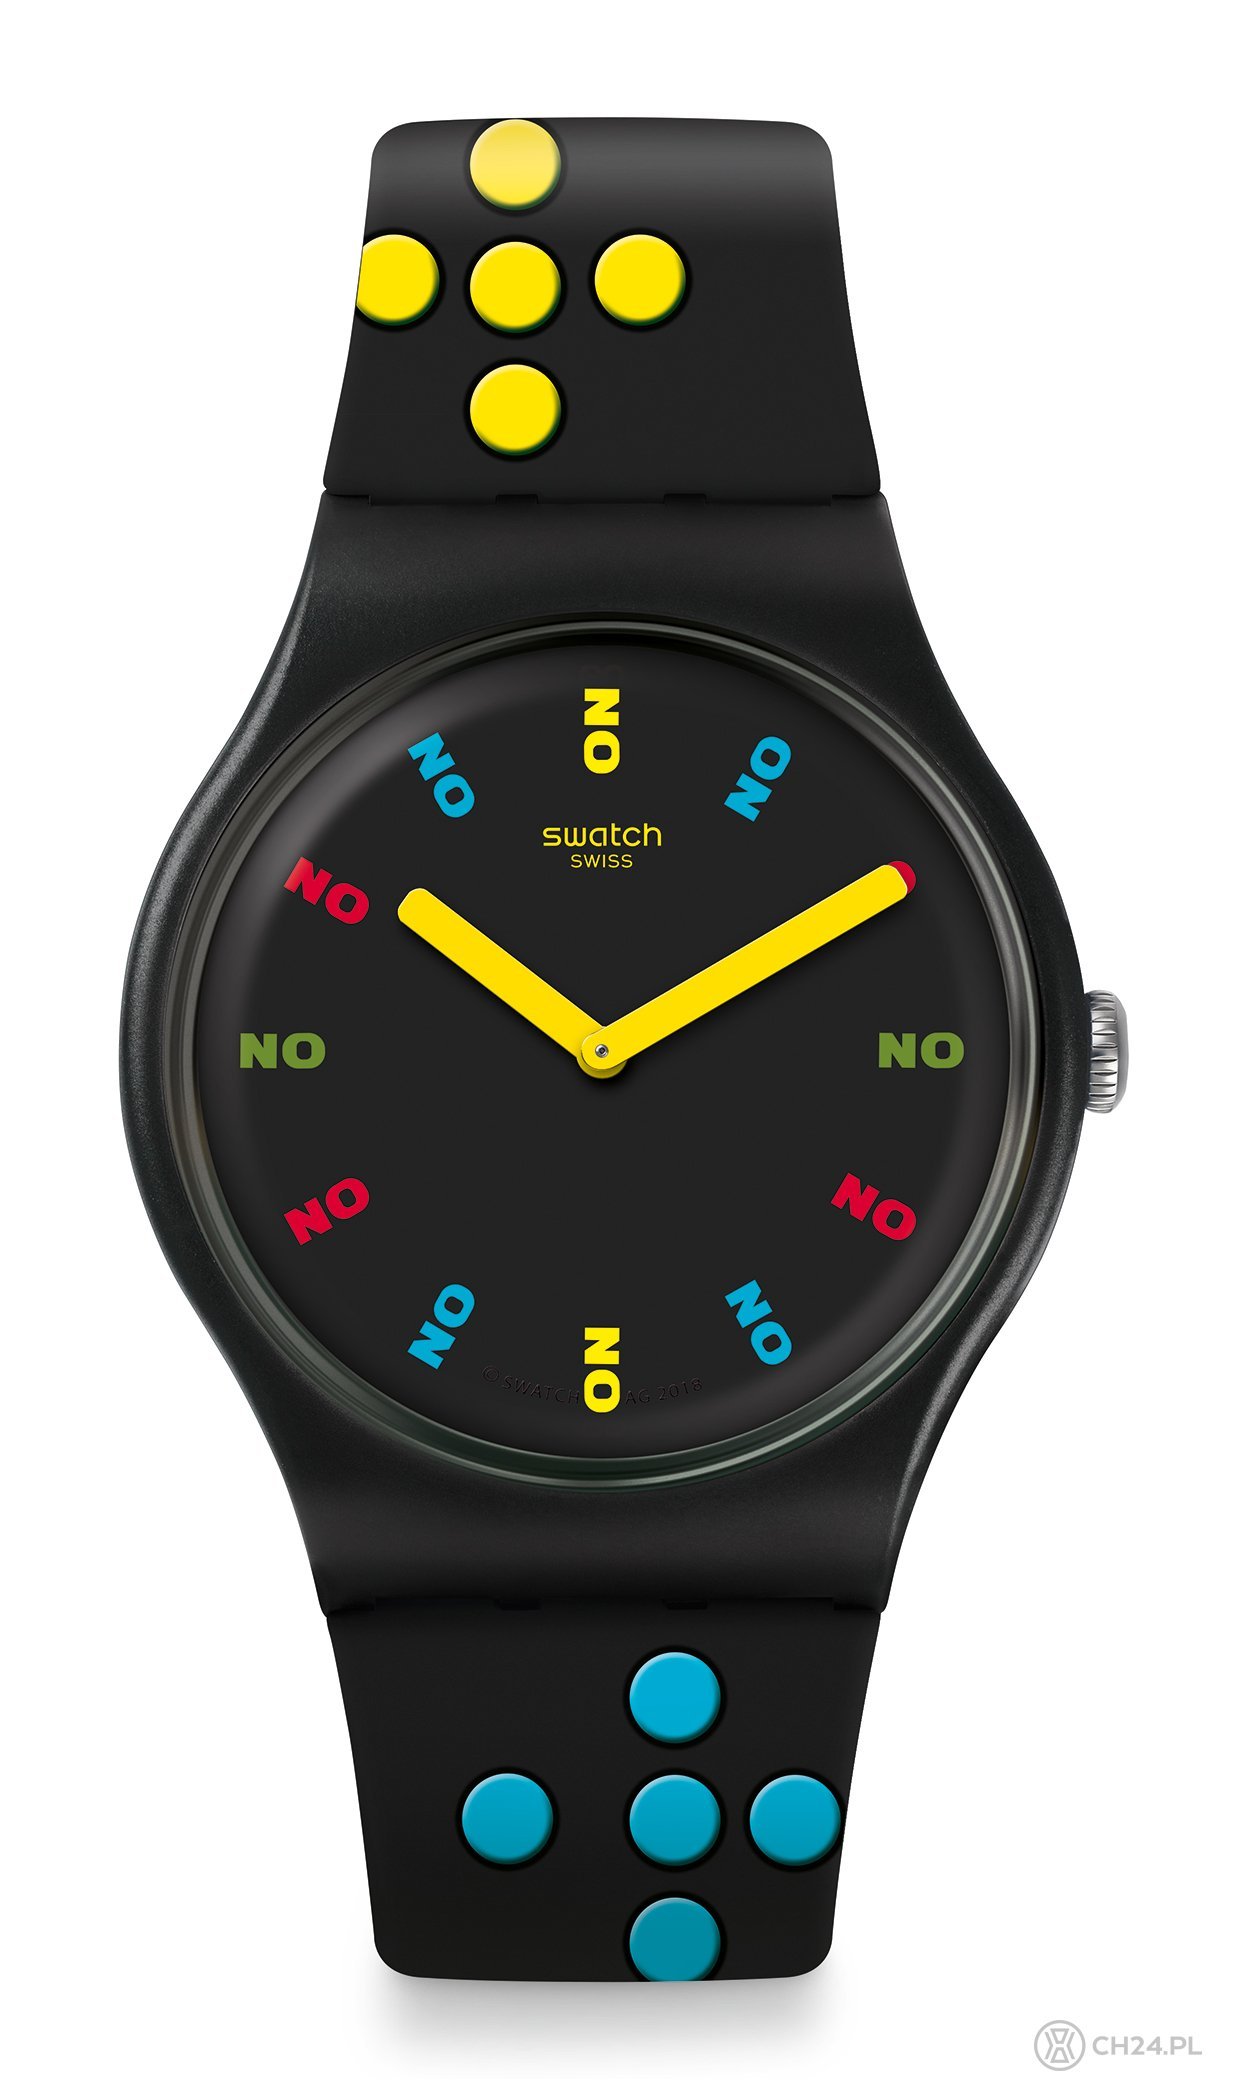 Swatch X 007 "Dr.No"